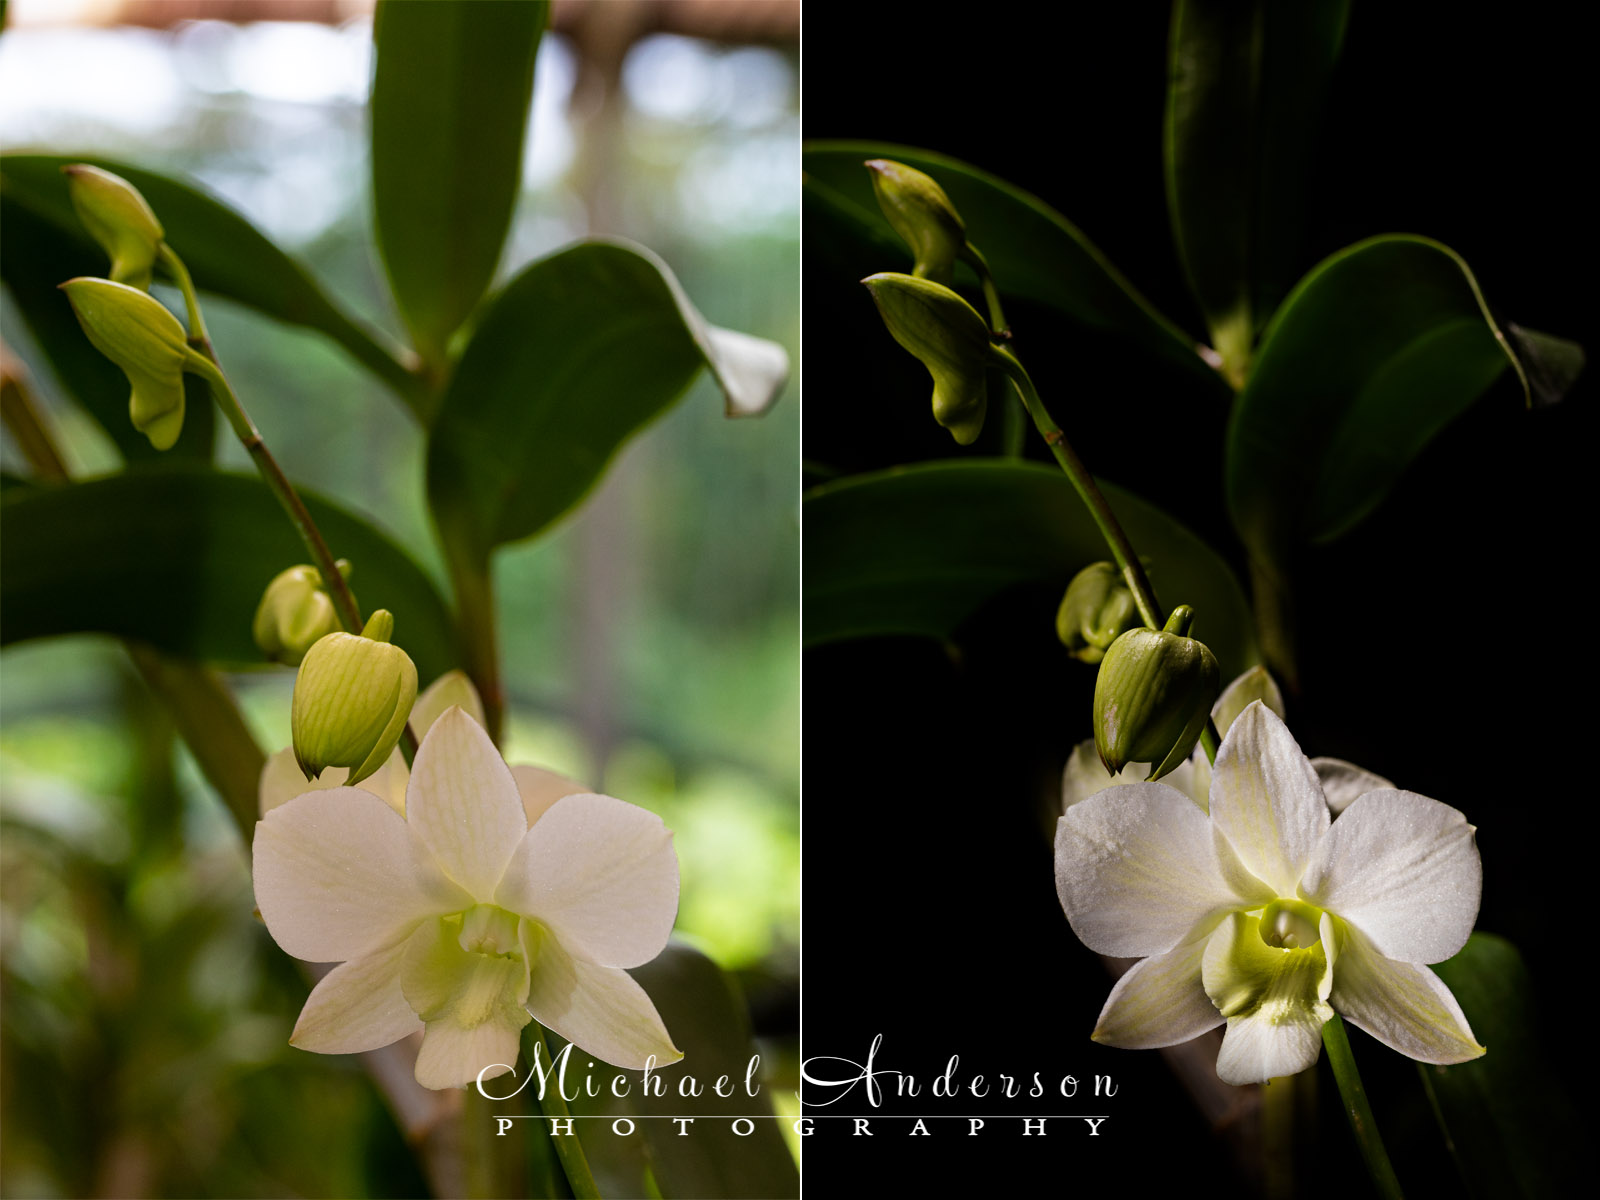 The before and after light painting photos of a White Dendrobium.